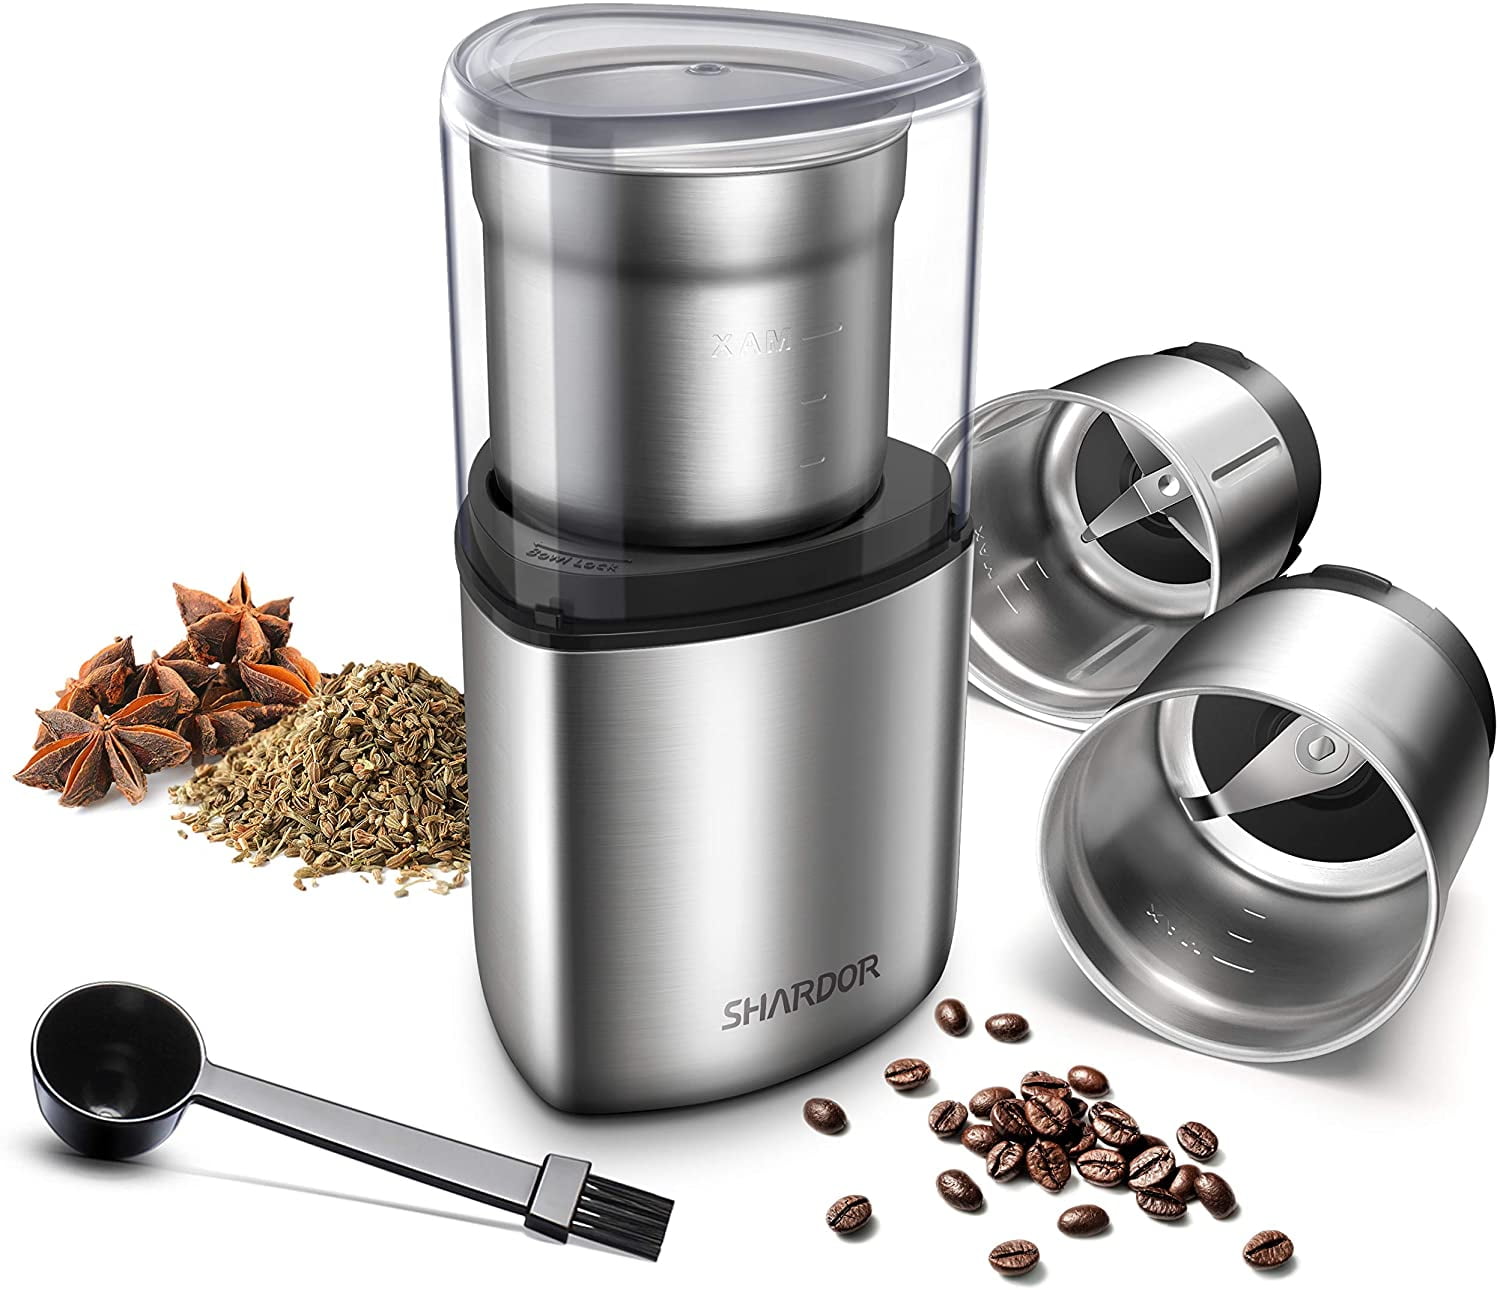 Removable Stainless Steel Bowl SHARDOR Coffee Grinder Electric Black.